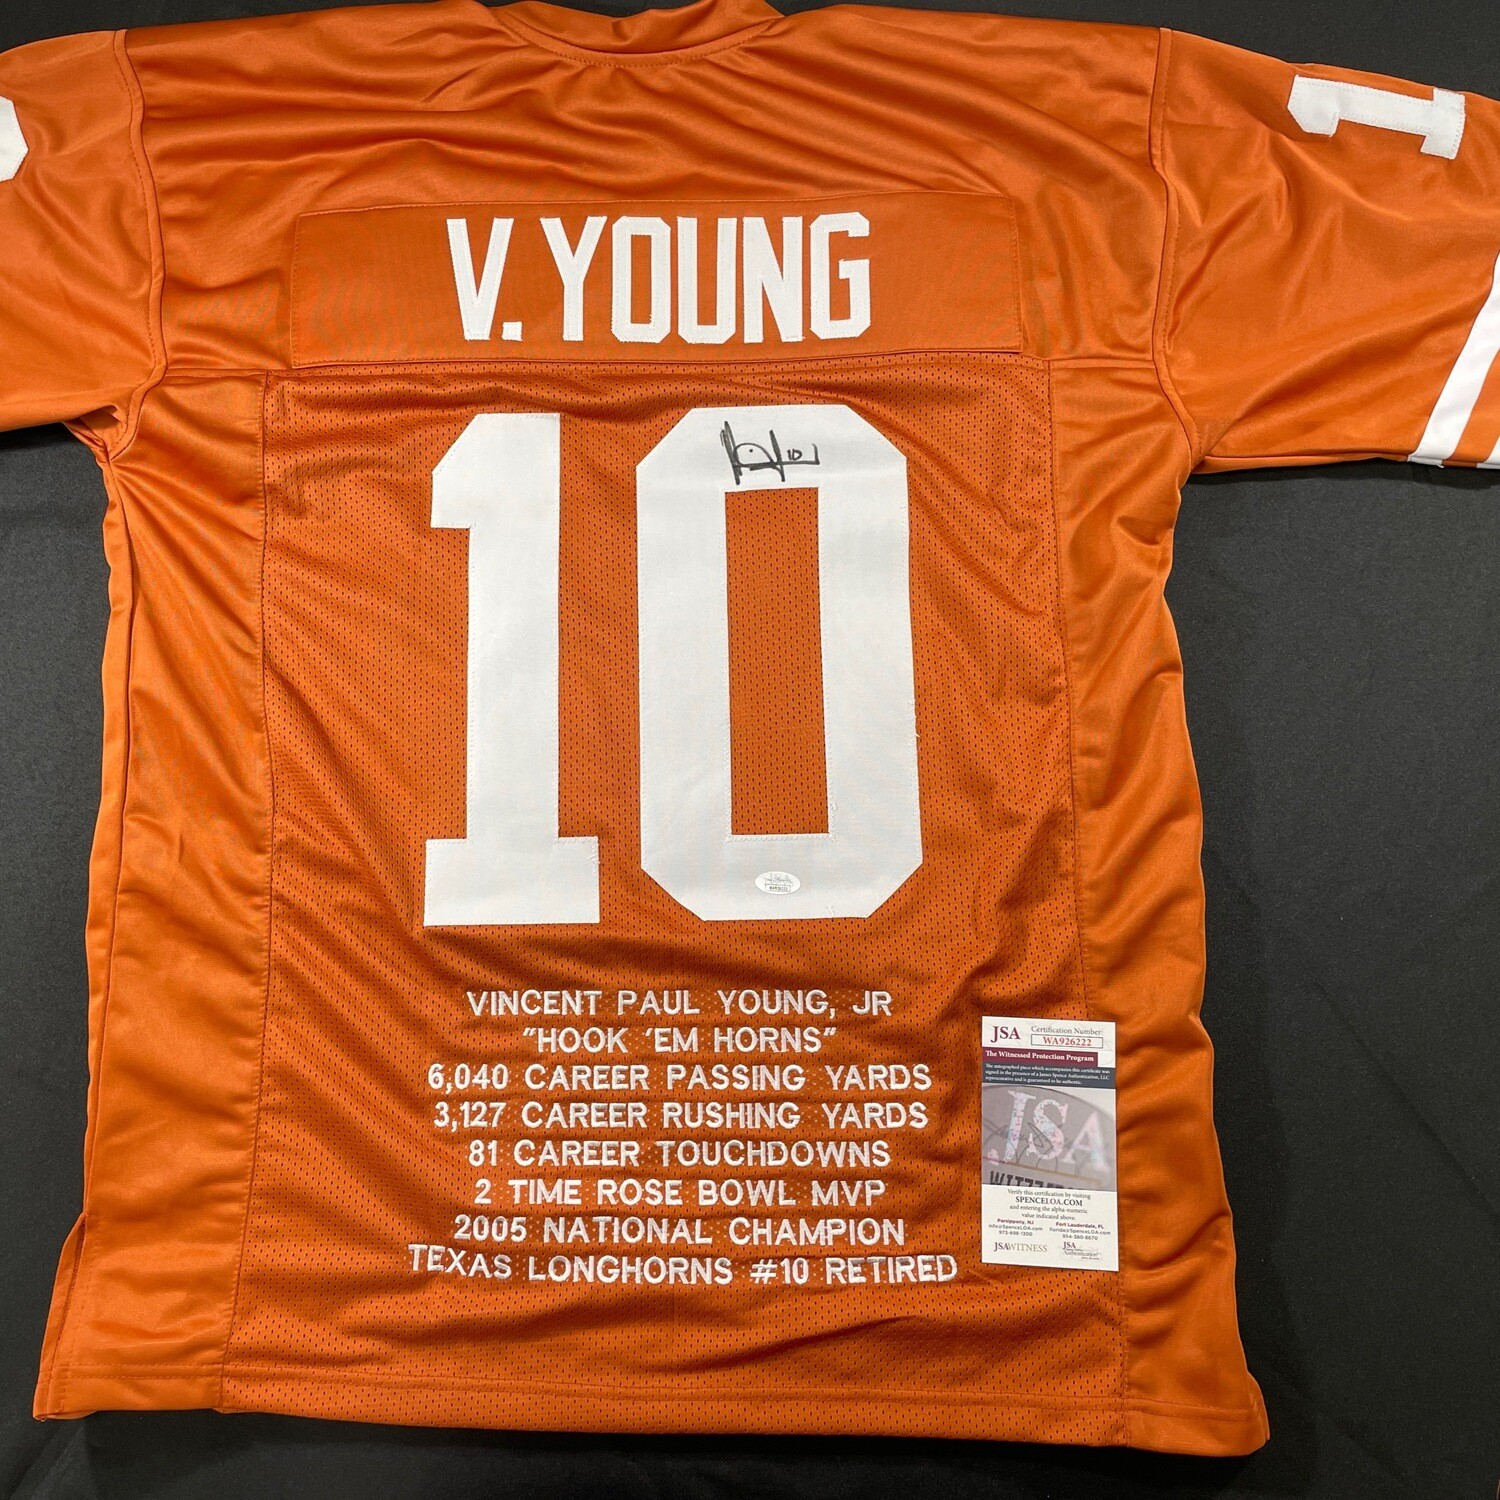 Vince Young Orange Texas Longhorns Full Stats Autographed Jersey JSA Authenticated